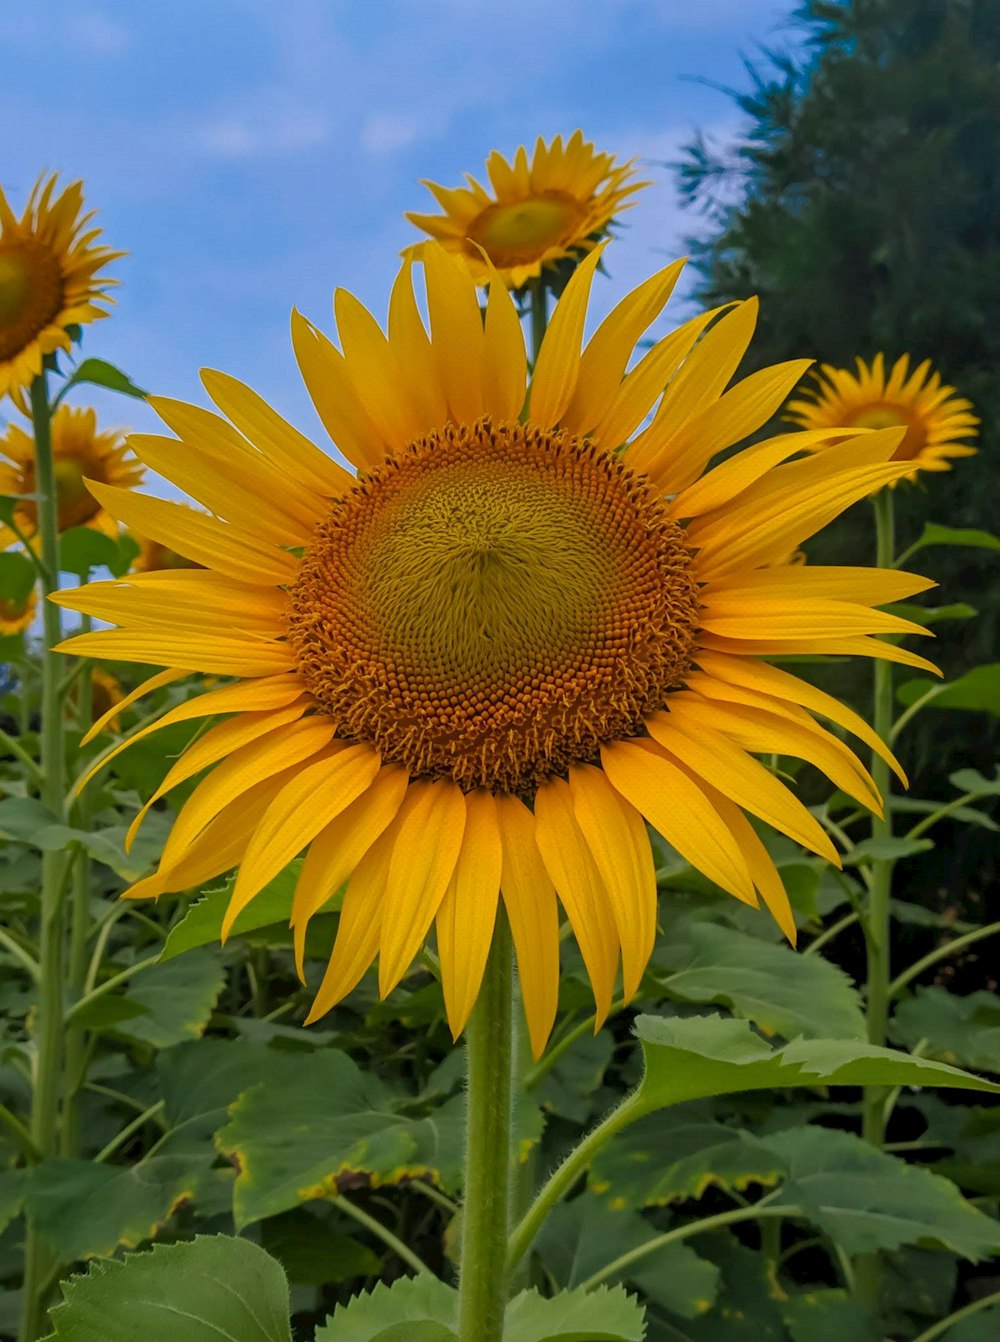 several sunflowers